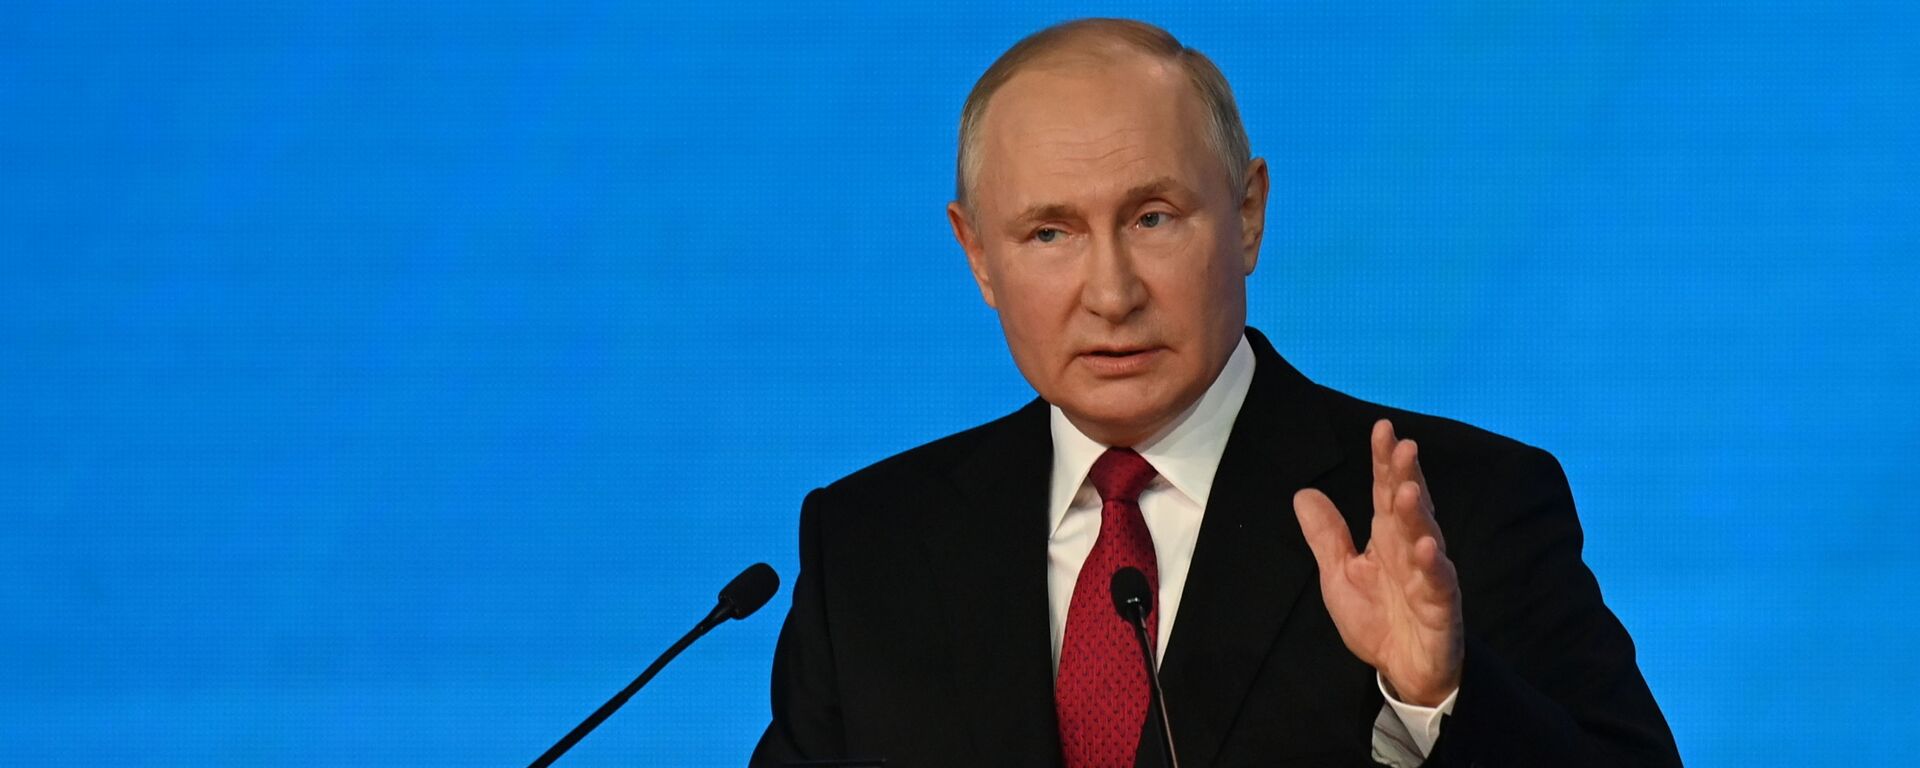 Russian President Vladimir Putin delivers a speech at a congress of the ruling United Russia party in Moscow, Russia August 24, 2021 - Sputnik International, 1920